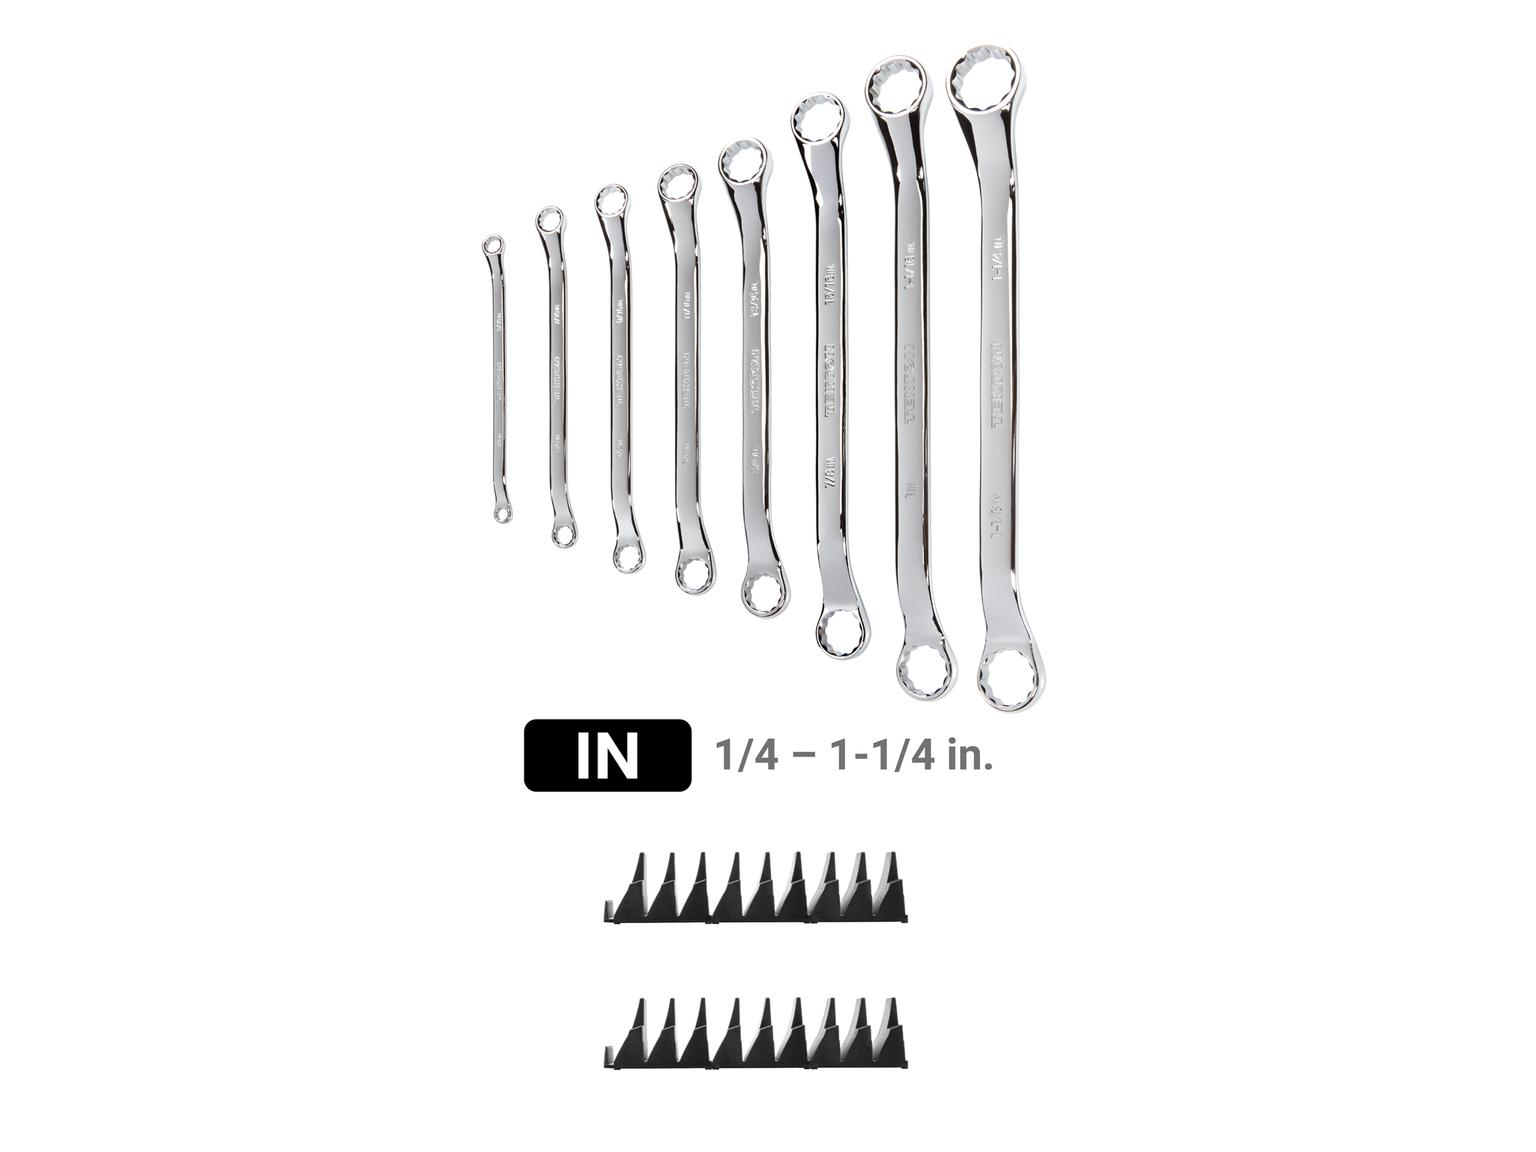 TEKTON WBE95102-T 45-Degree Offset Box End Wrench Set with Modular Slotted Organizer, 8-Piece (1/4 - 1-1/4 in.)